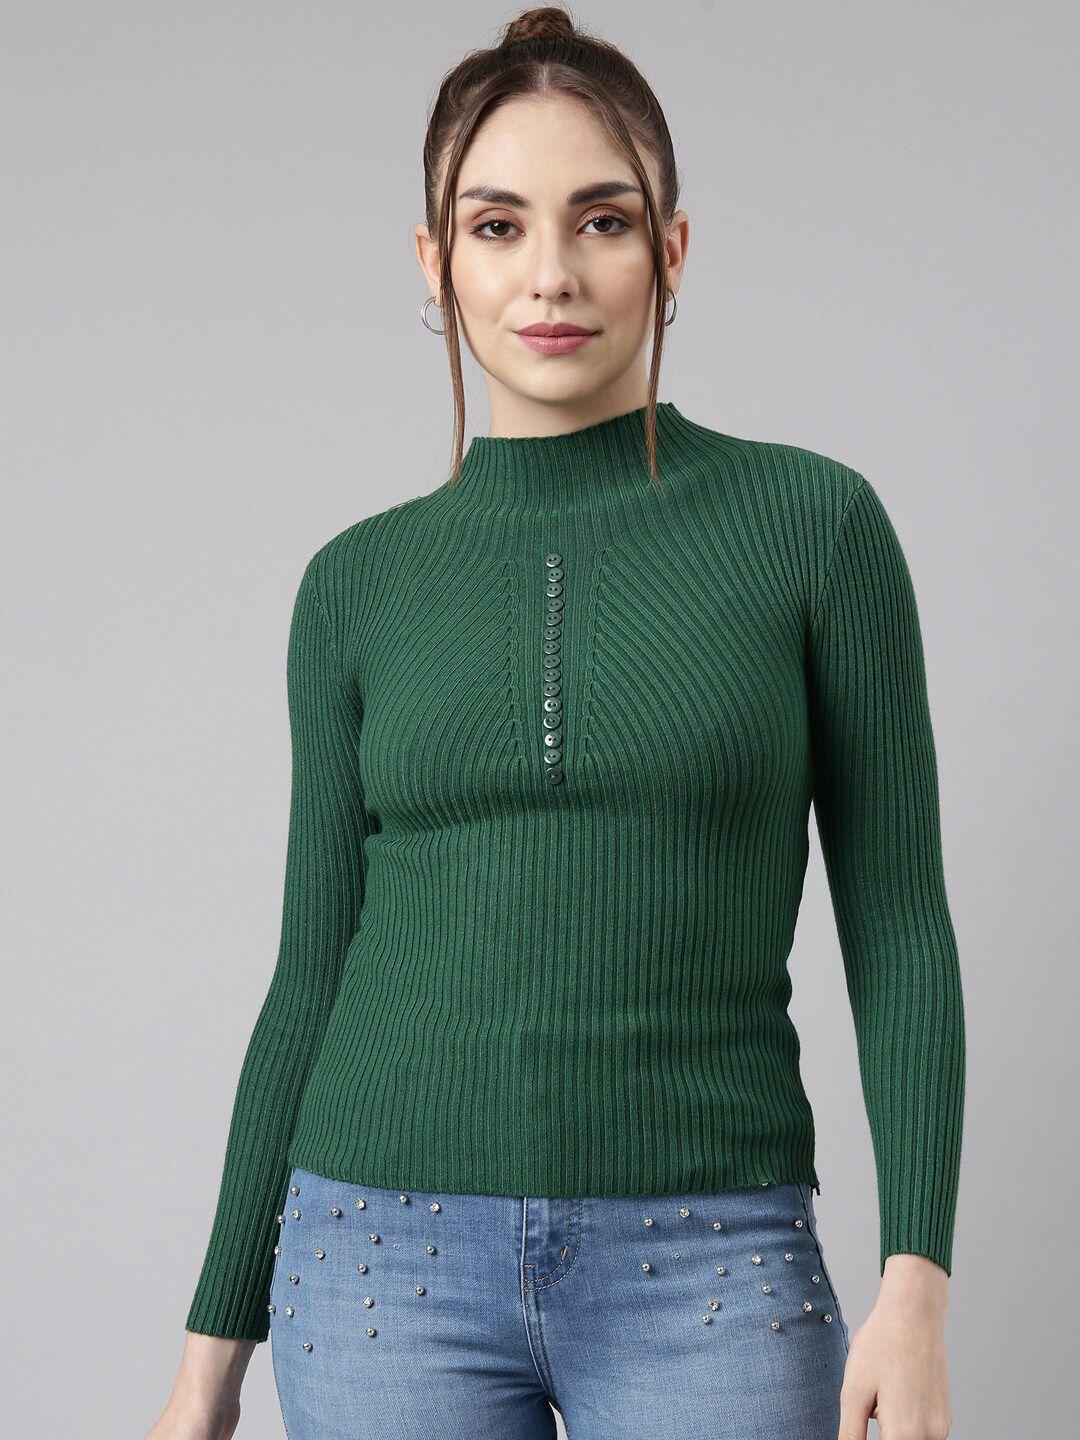 showoff-high-neck-long-sleeves-striped-fitted-top